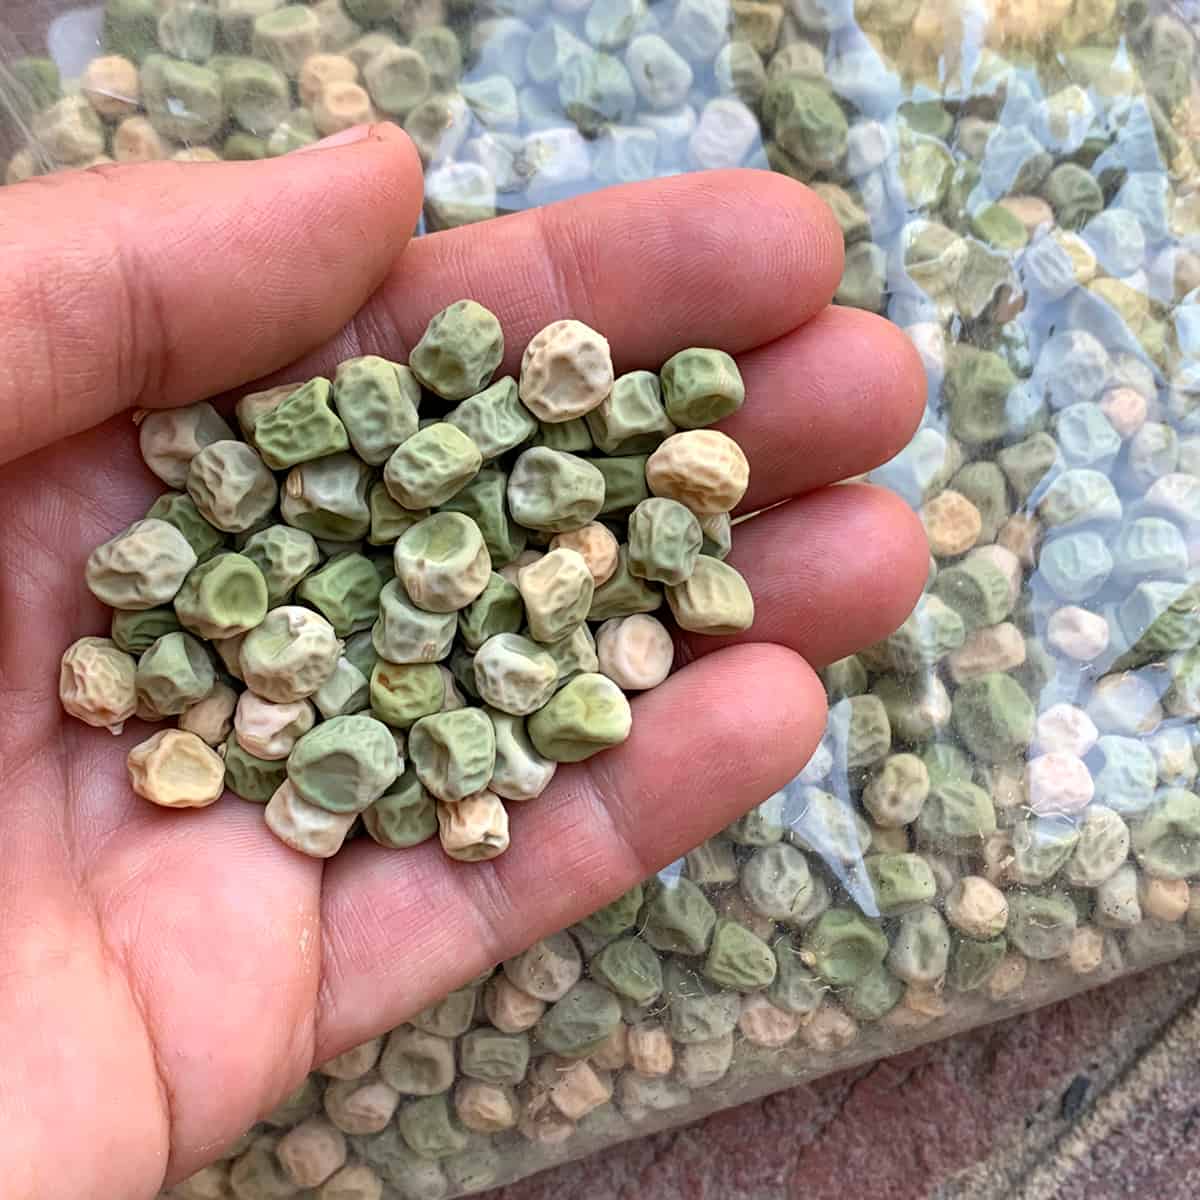 Saving Seeds: How to Collect and Preserve Pea Seeds for Future Planting